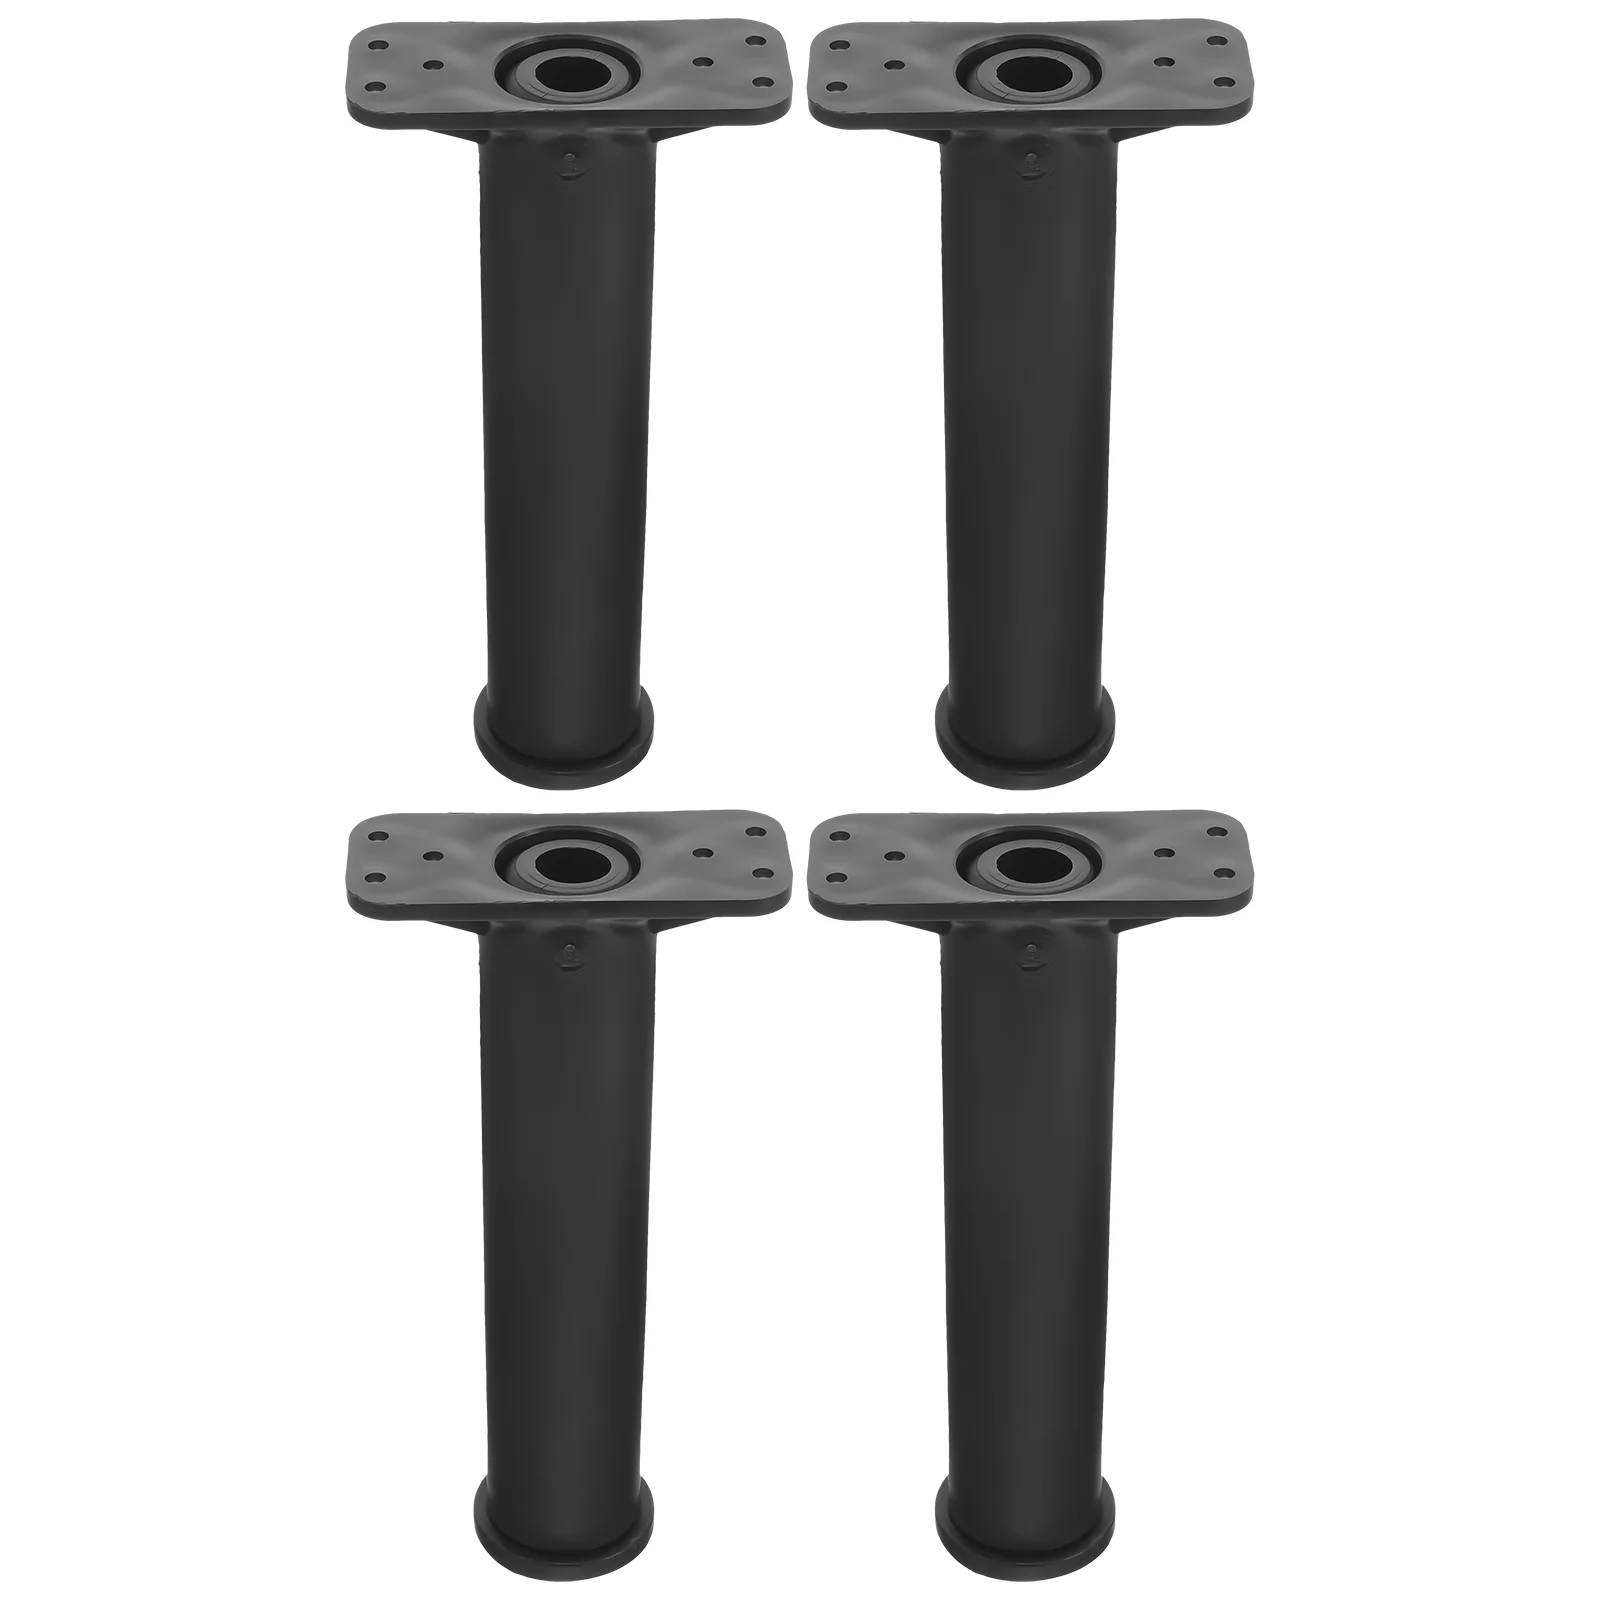 

4 Pcs Bed Frames Support Center Leg Adjustable Legs Fall to The Ground Parts Replacement